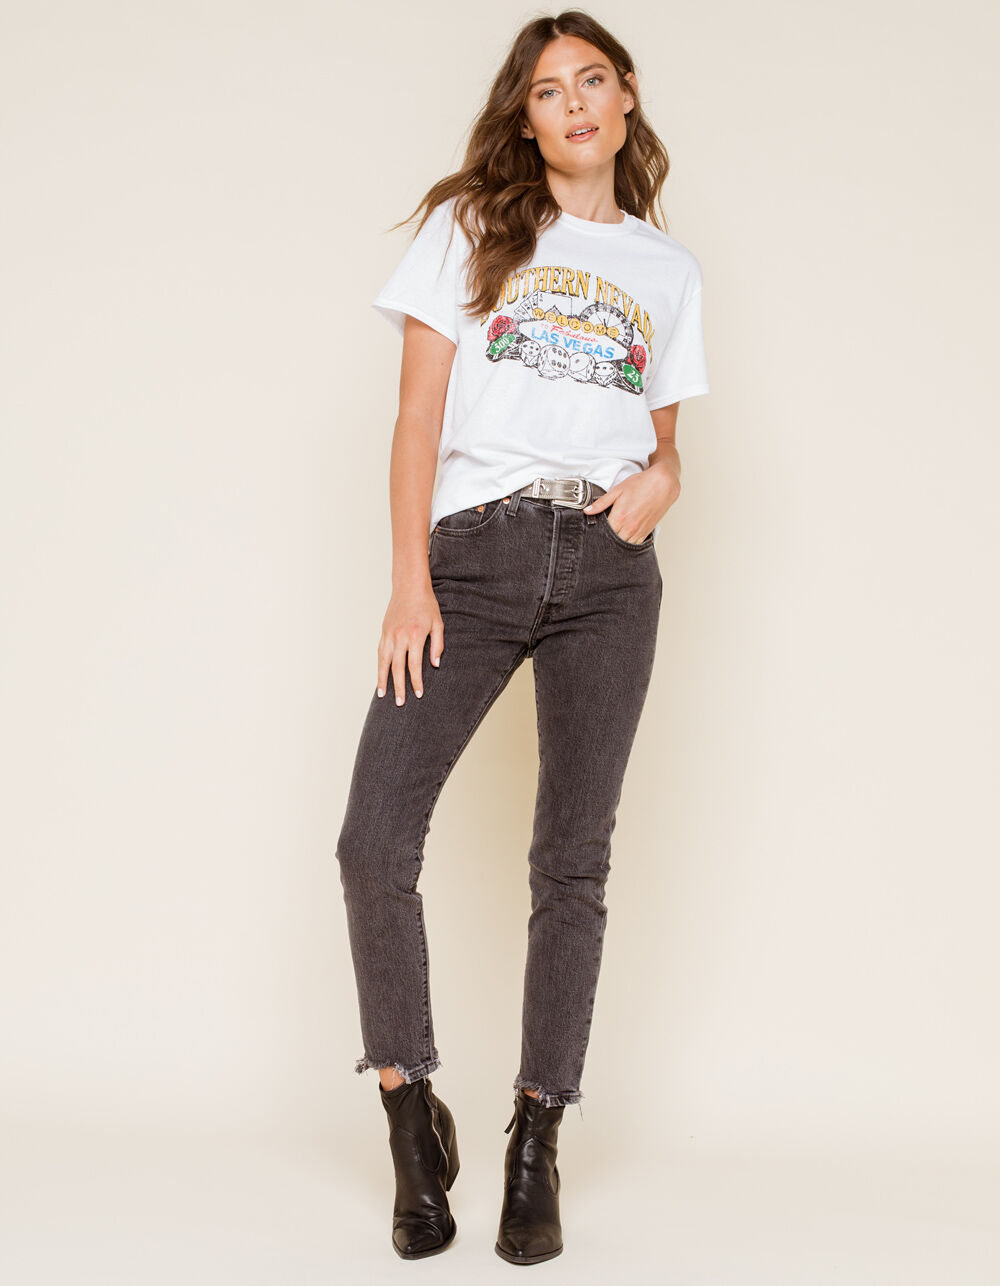 WEST OF MELROSE Southern Nevada Womens Tee - WHITE | Tillys